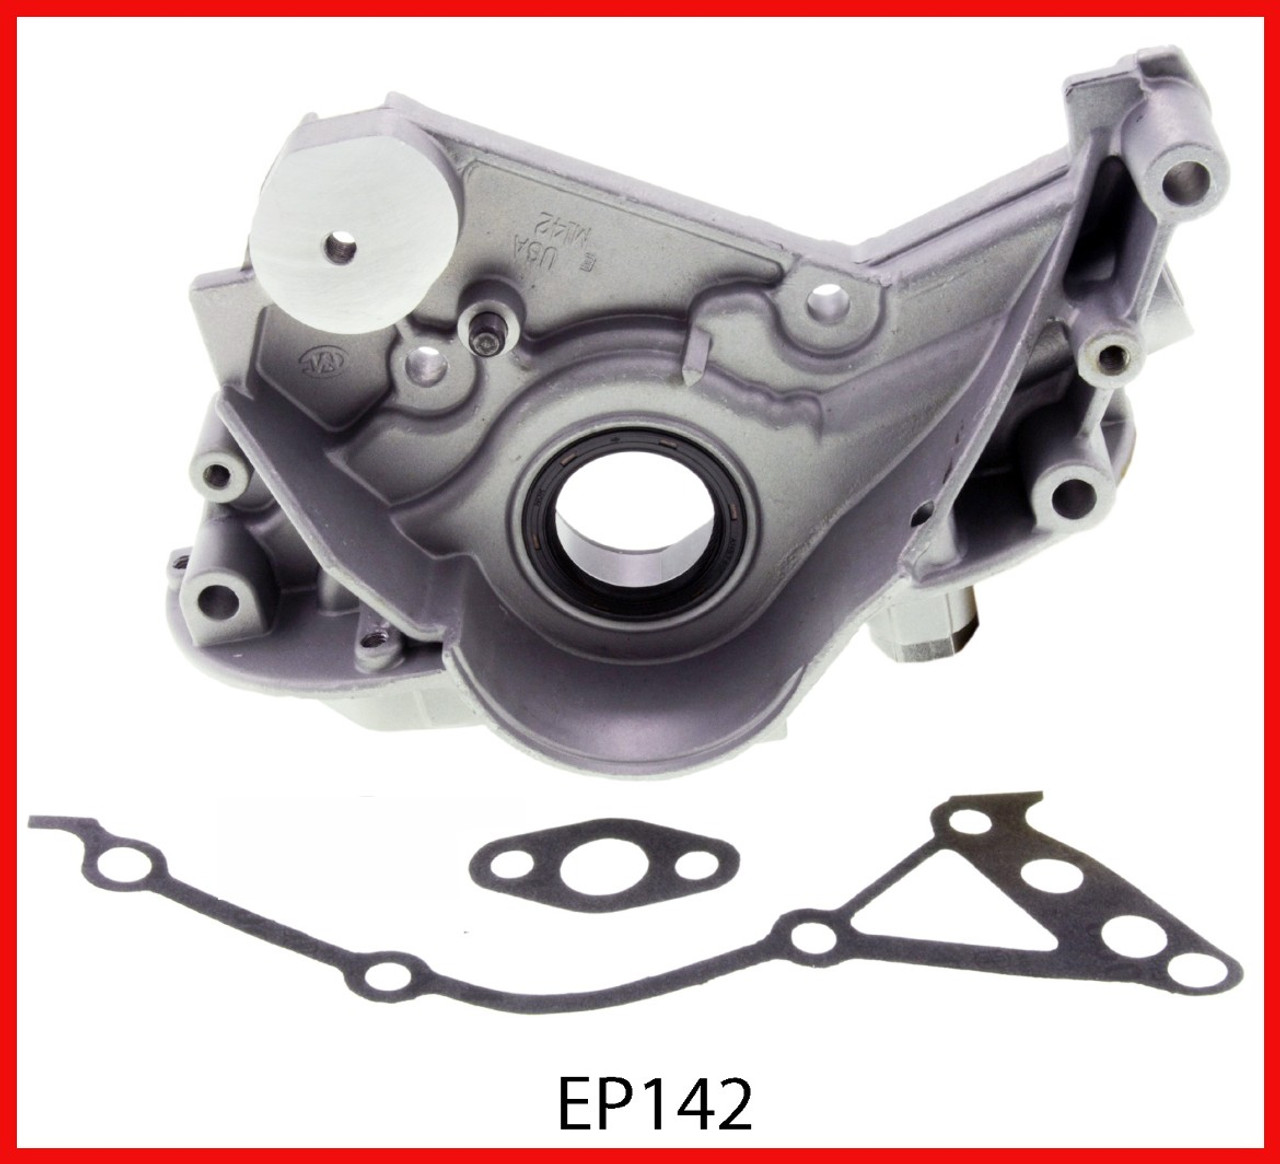 1989 Plymouth Acclaim 3.0L Engine Oil Pump EP142 -18